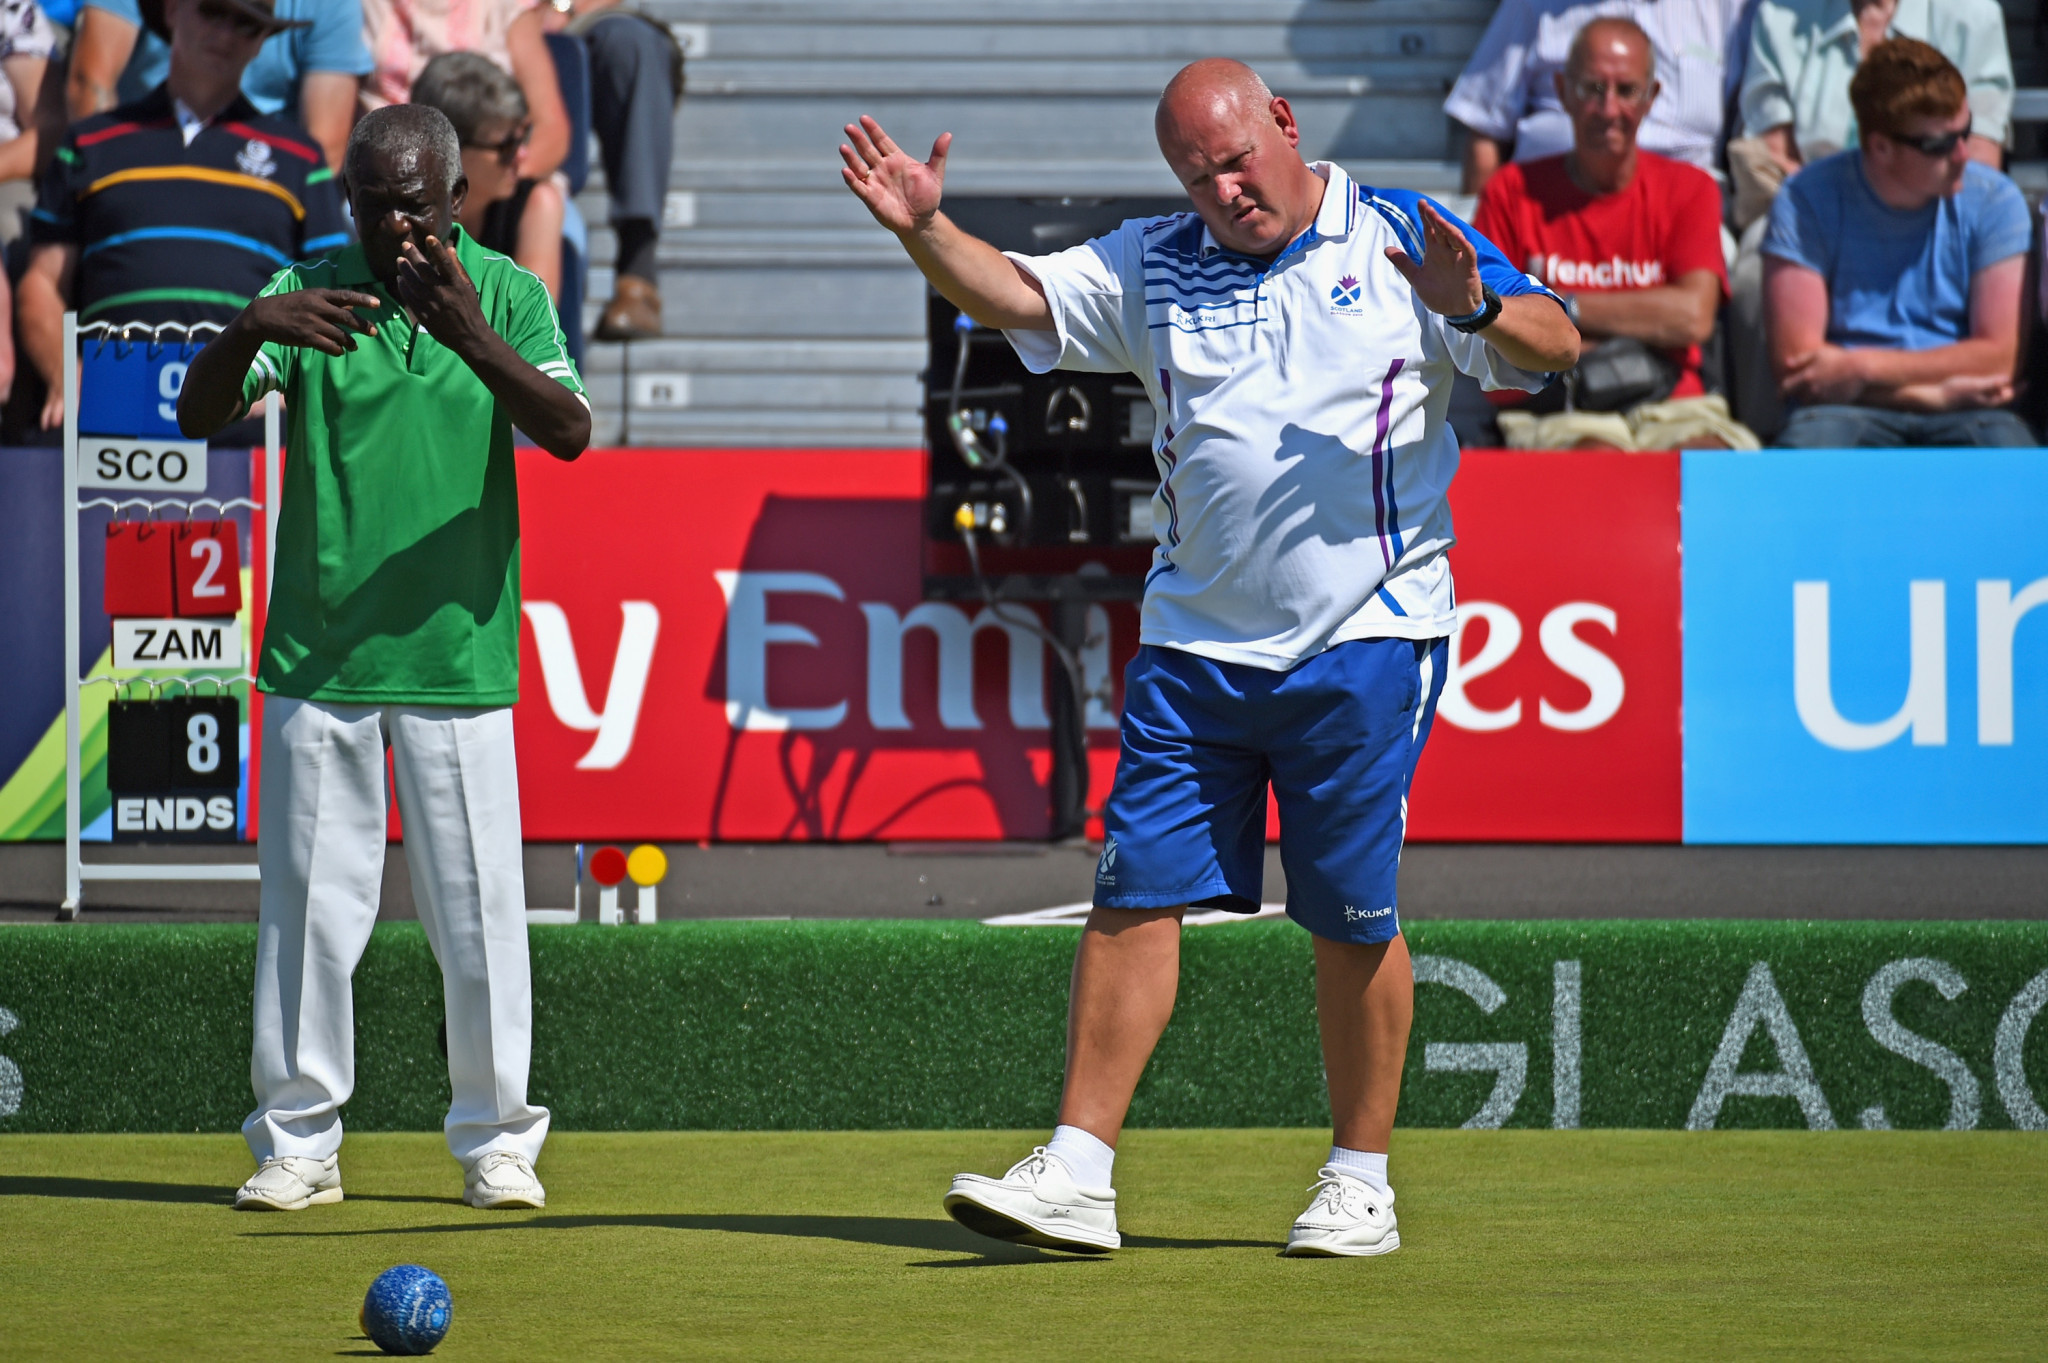 Marshall closes in on lawn bowls Commonwealth Games records at Birmingham 2022